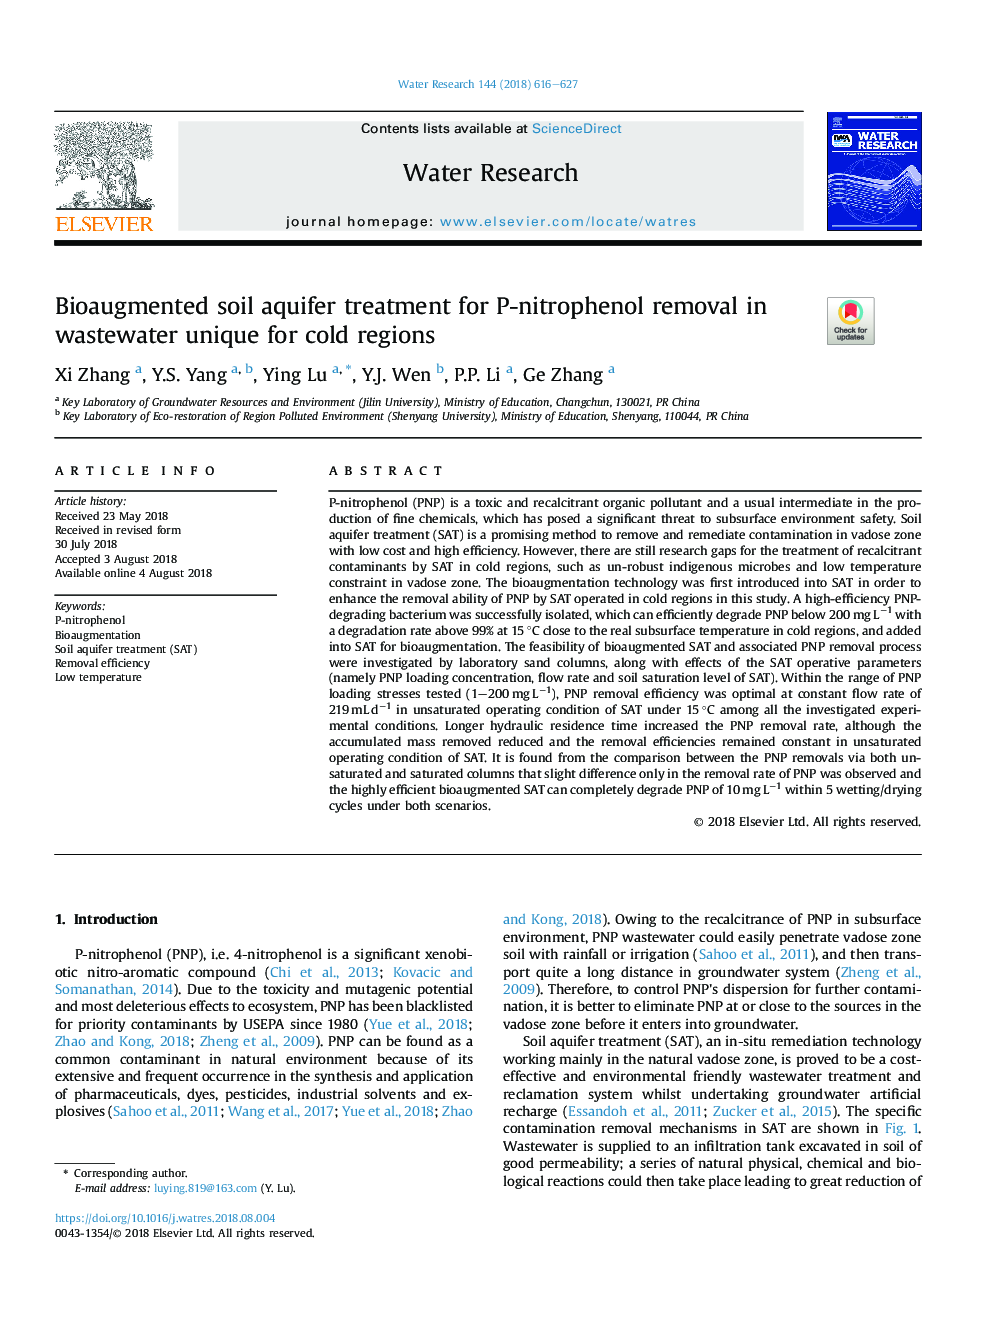 Bioaugmented soil aquifer treatment for P-nitrophenol removal in wastewater unique for cold regions